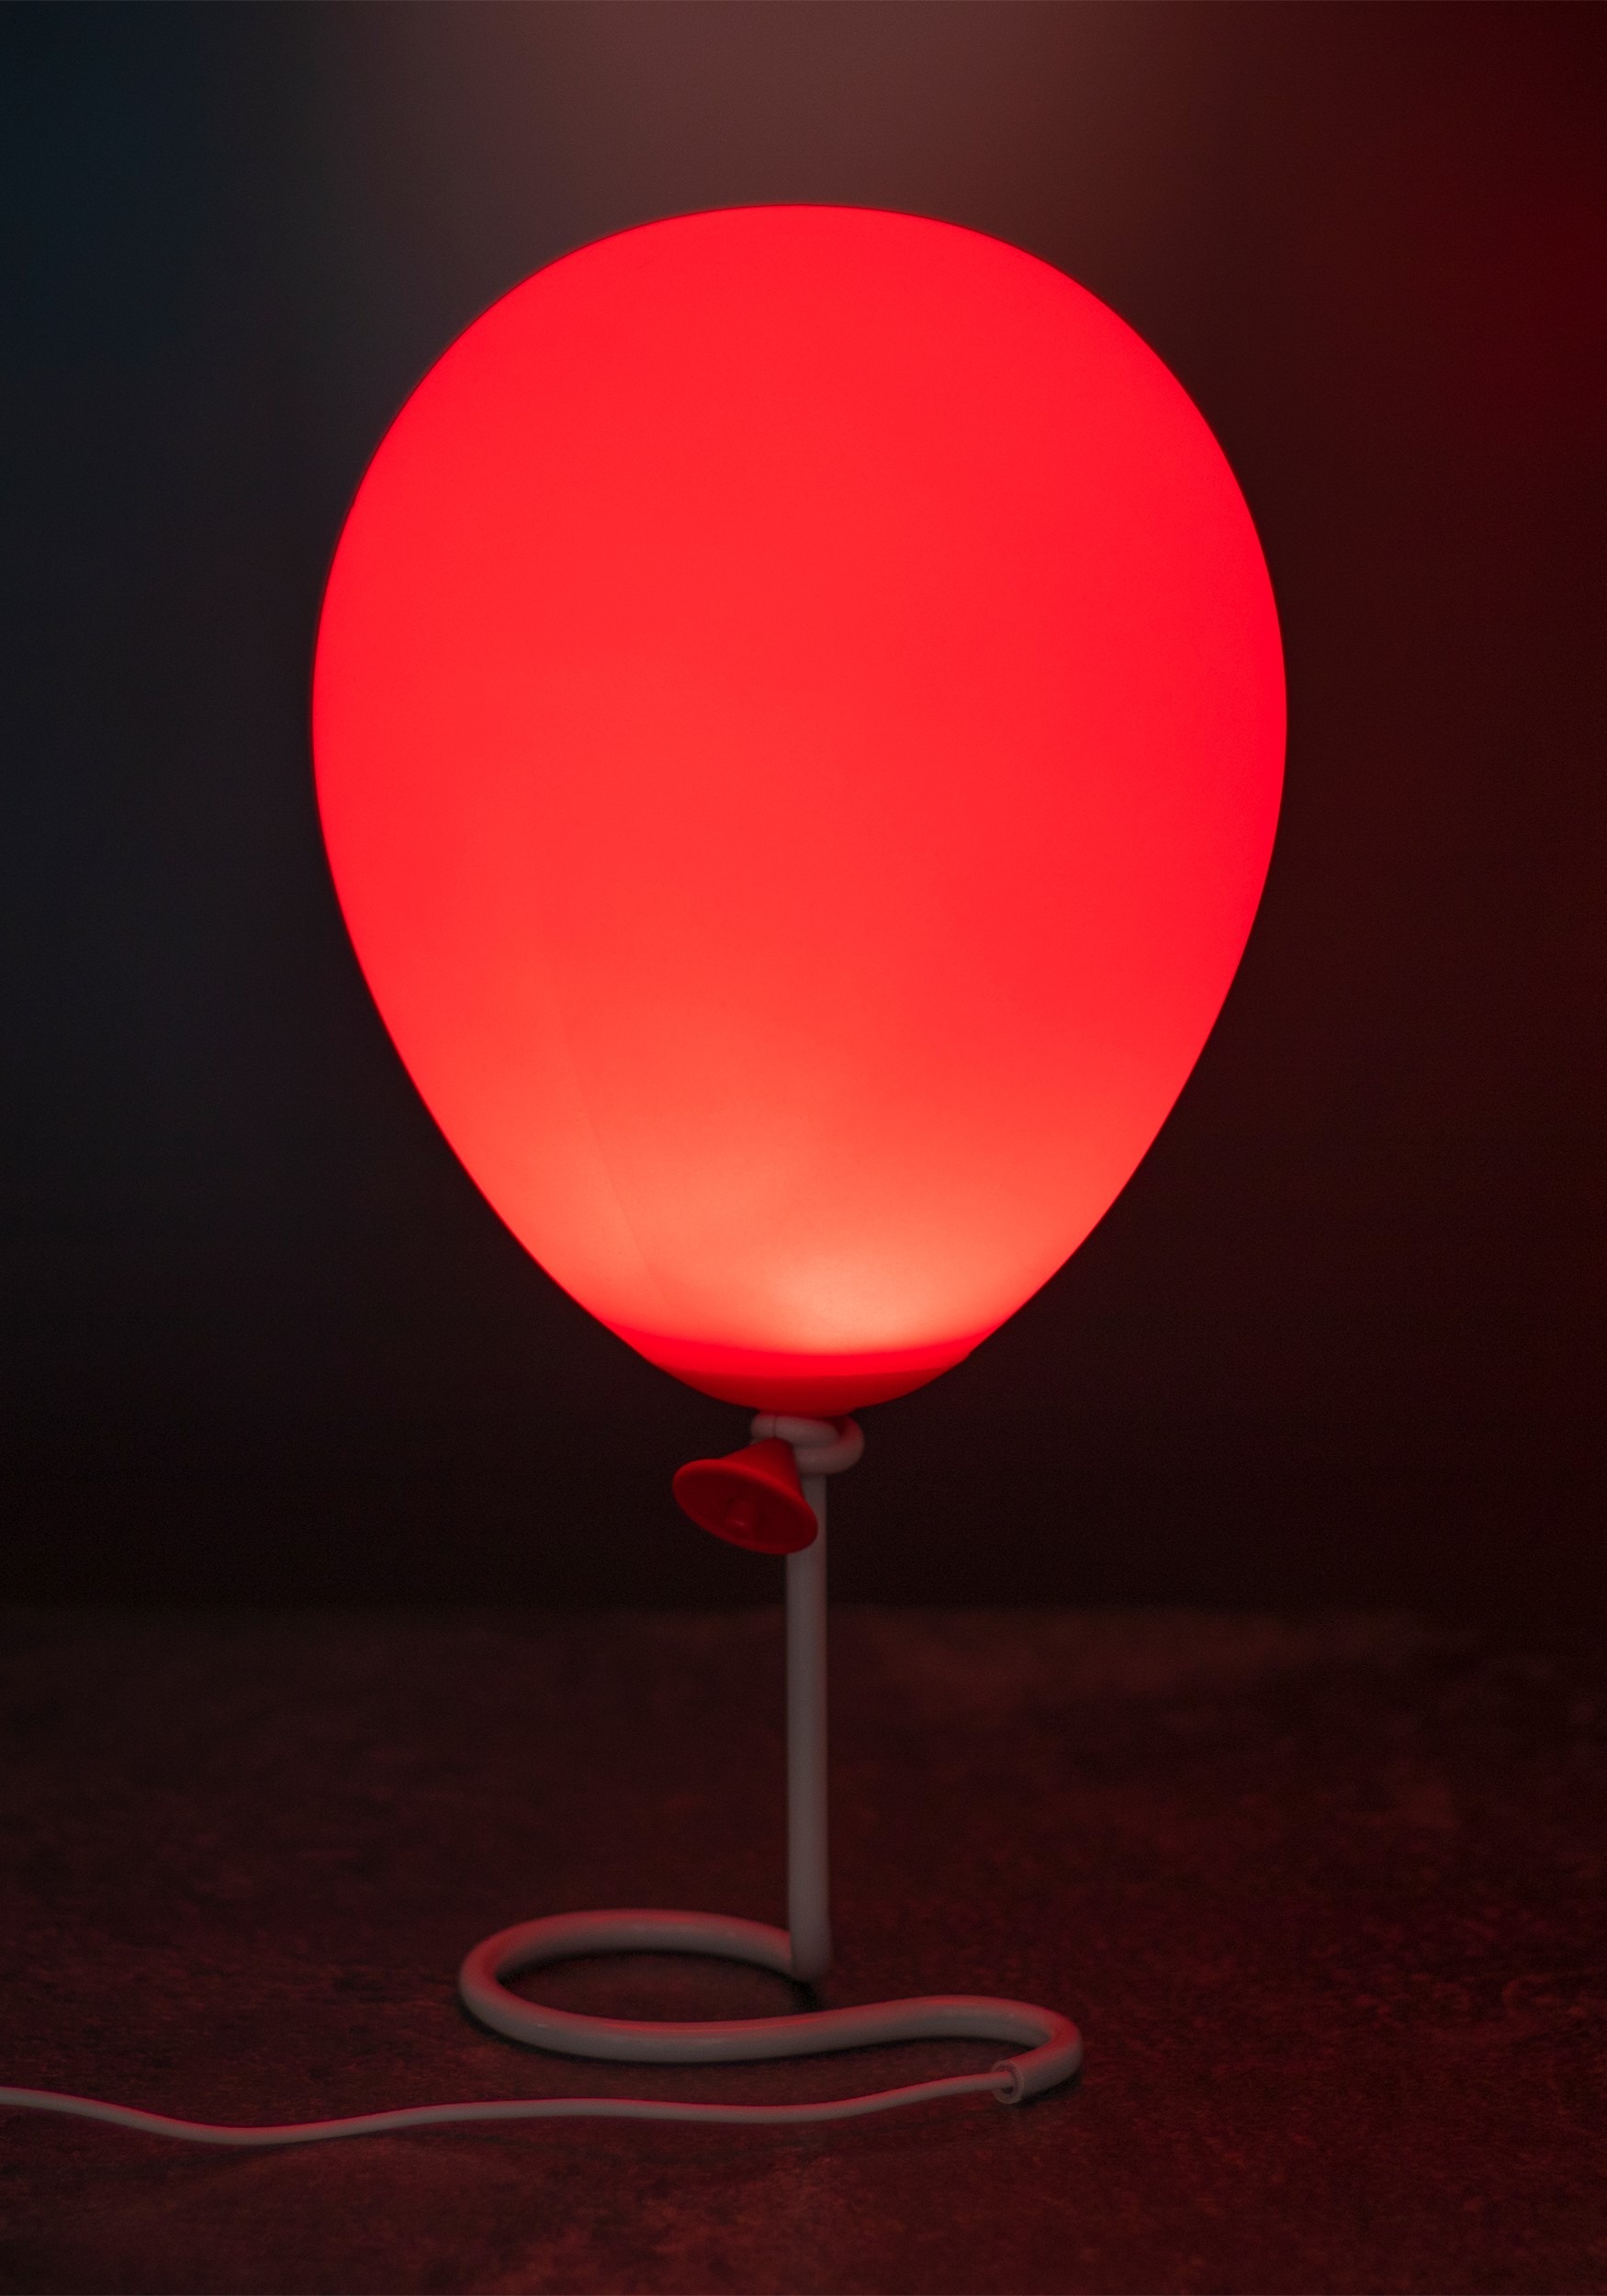 Northern Lights Glitter Lamp 14.5 – The Red Balloon Toy Store